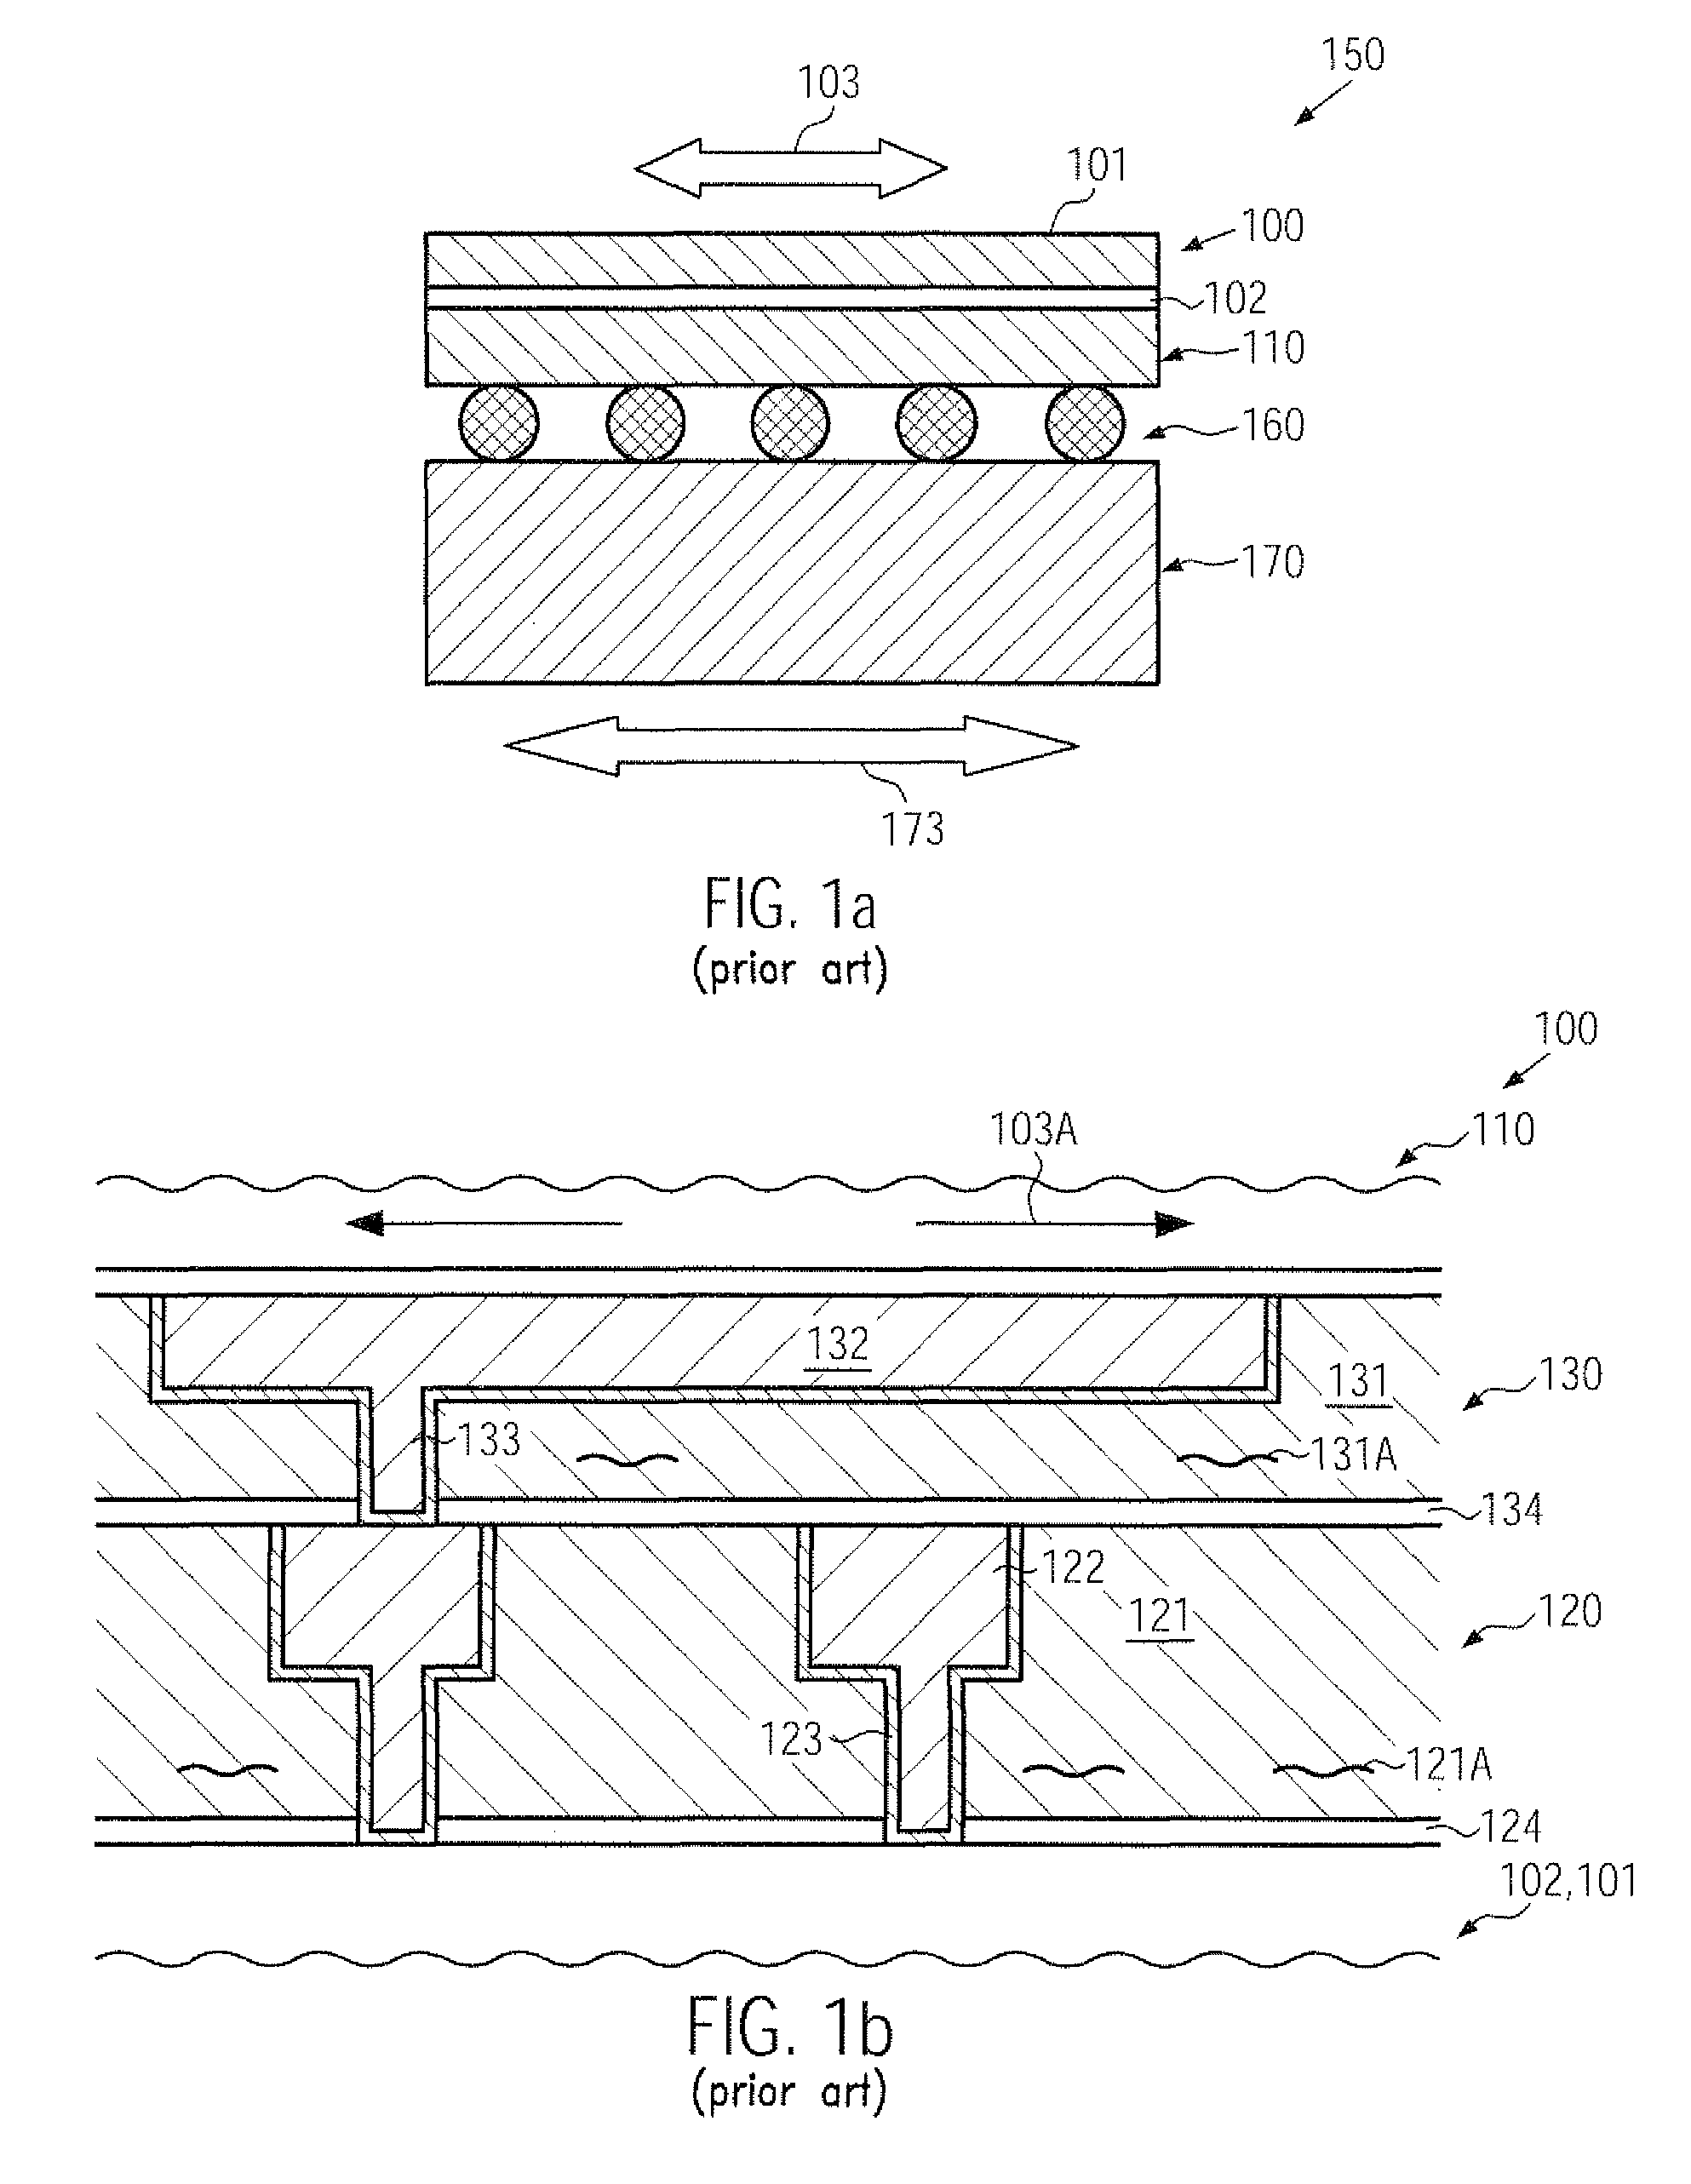 Semiconductor device including stress relaxation gaps for enhancing chip package interaction stability